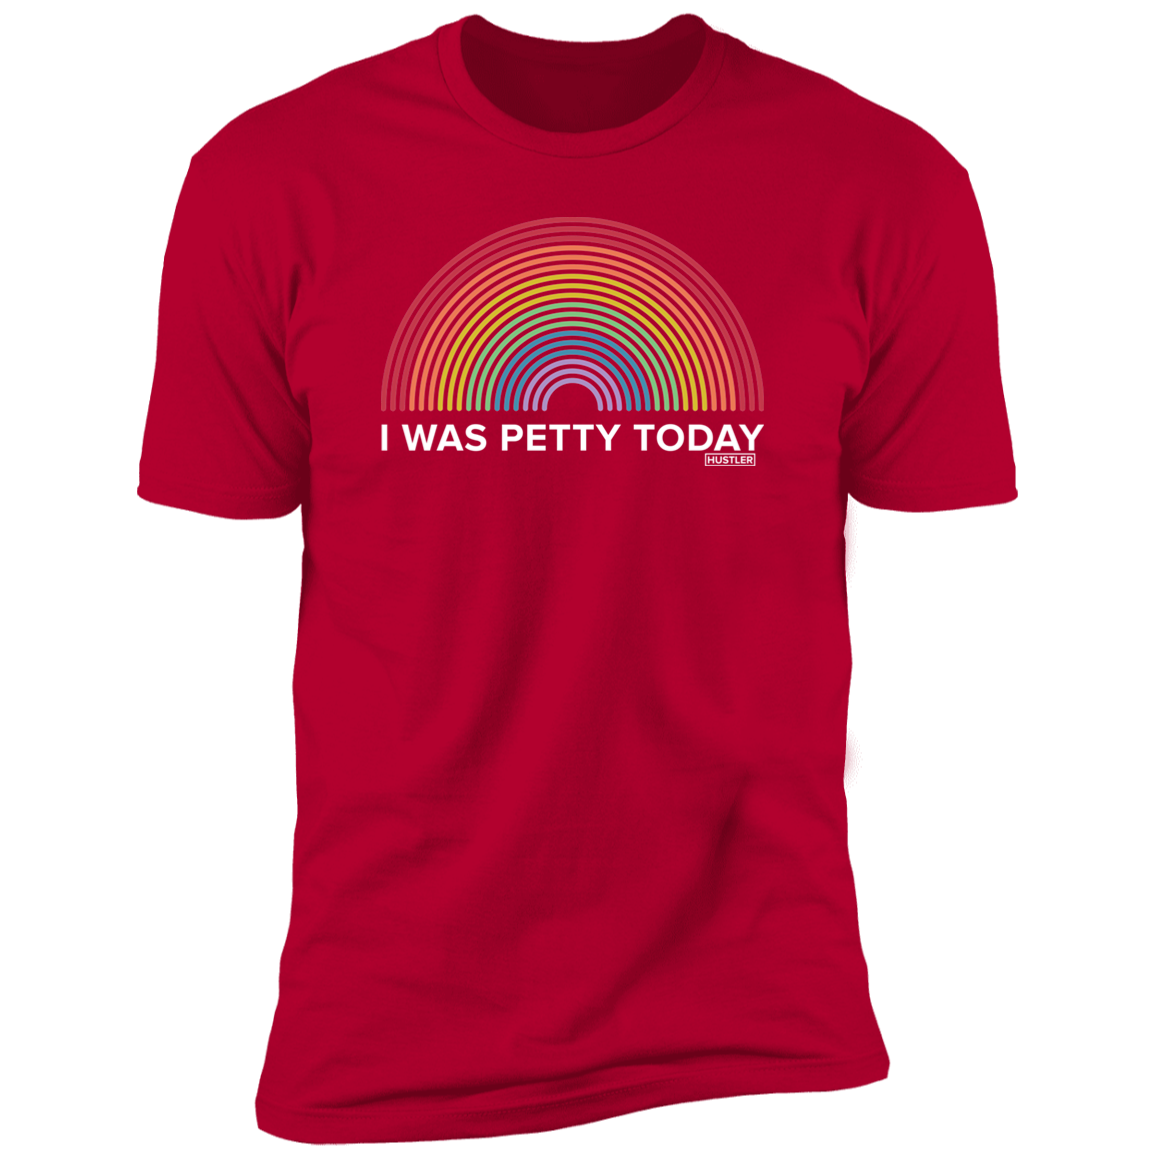 I Was Petty Today T-Shirt